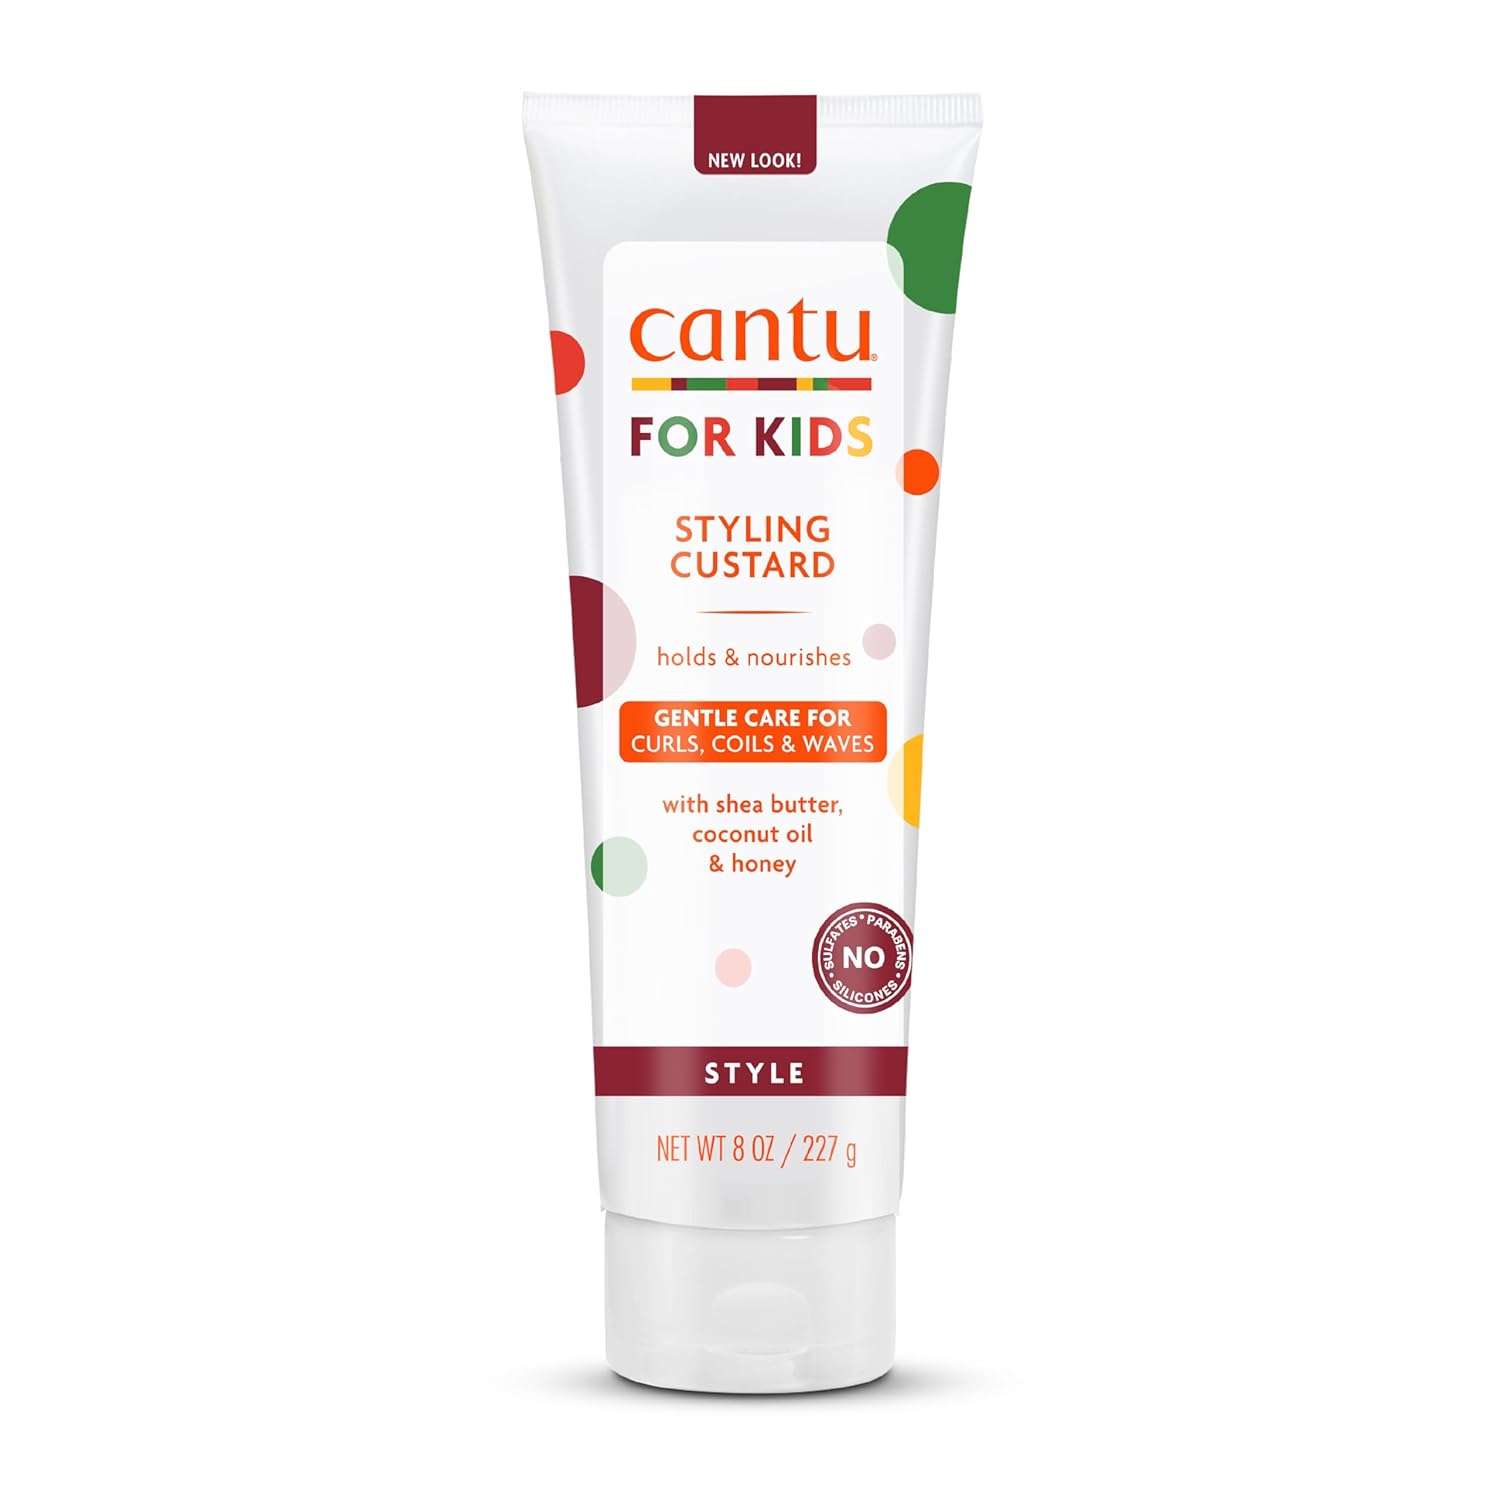 8-Ounce Cantu Care Styling Custard for Kids $2.65, 13-5-Ounce Cantu Cleansing Cream Shampoo or Conditioner $3.76, More + Free Shipping w/ PRime or $35+